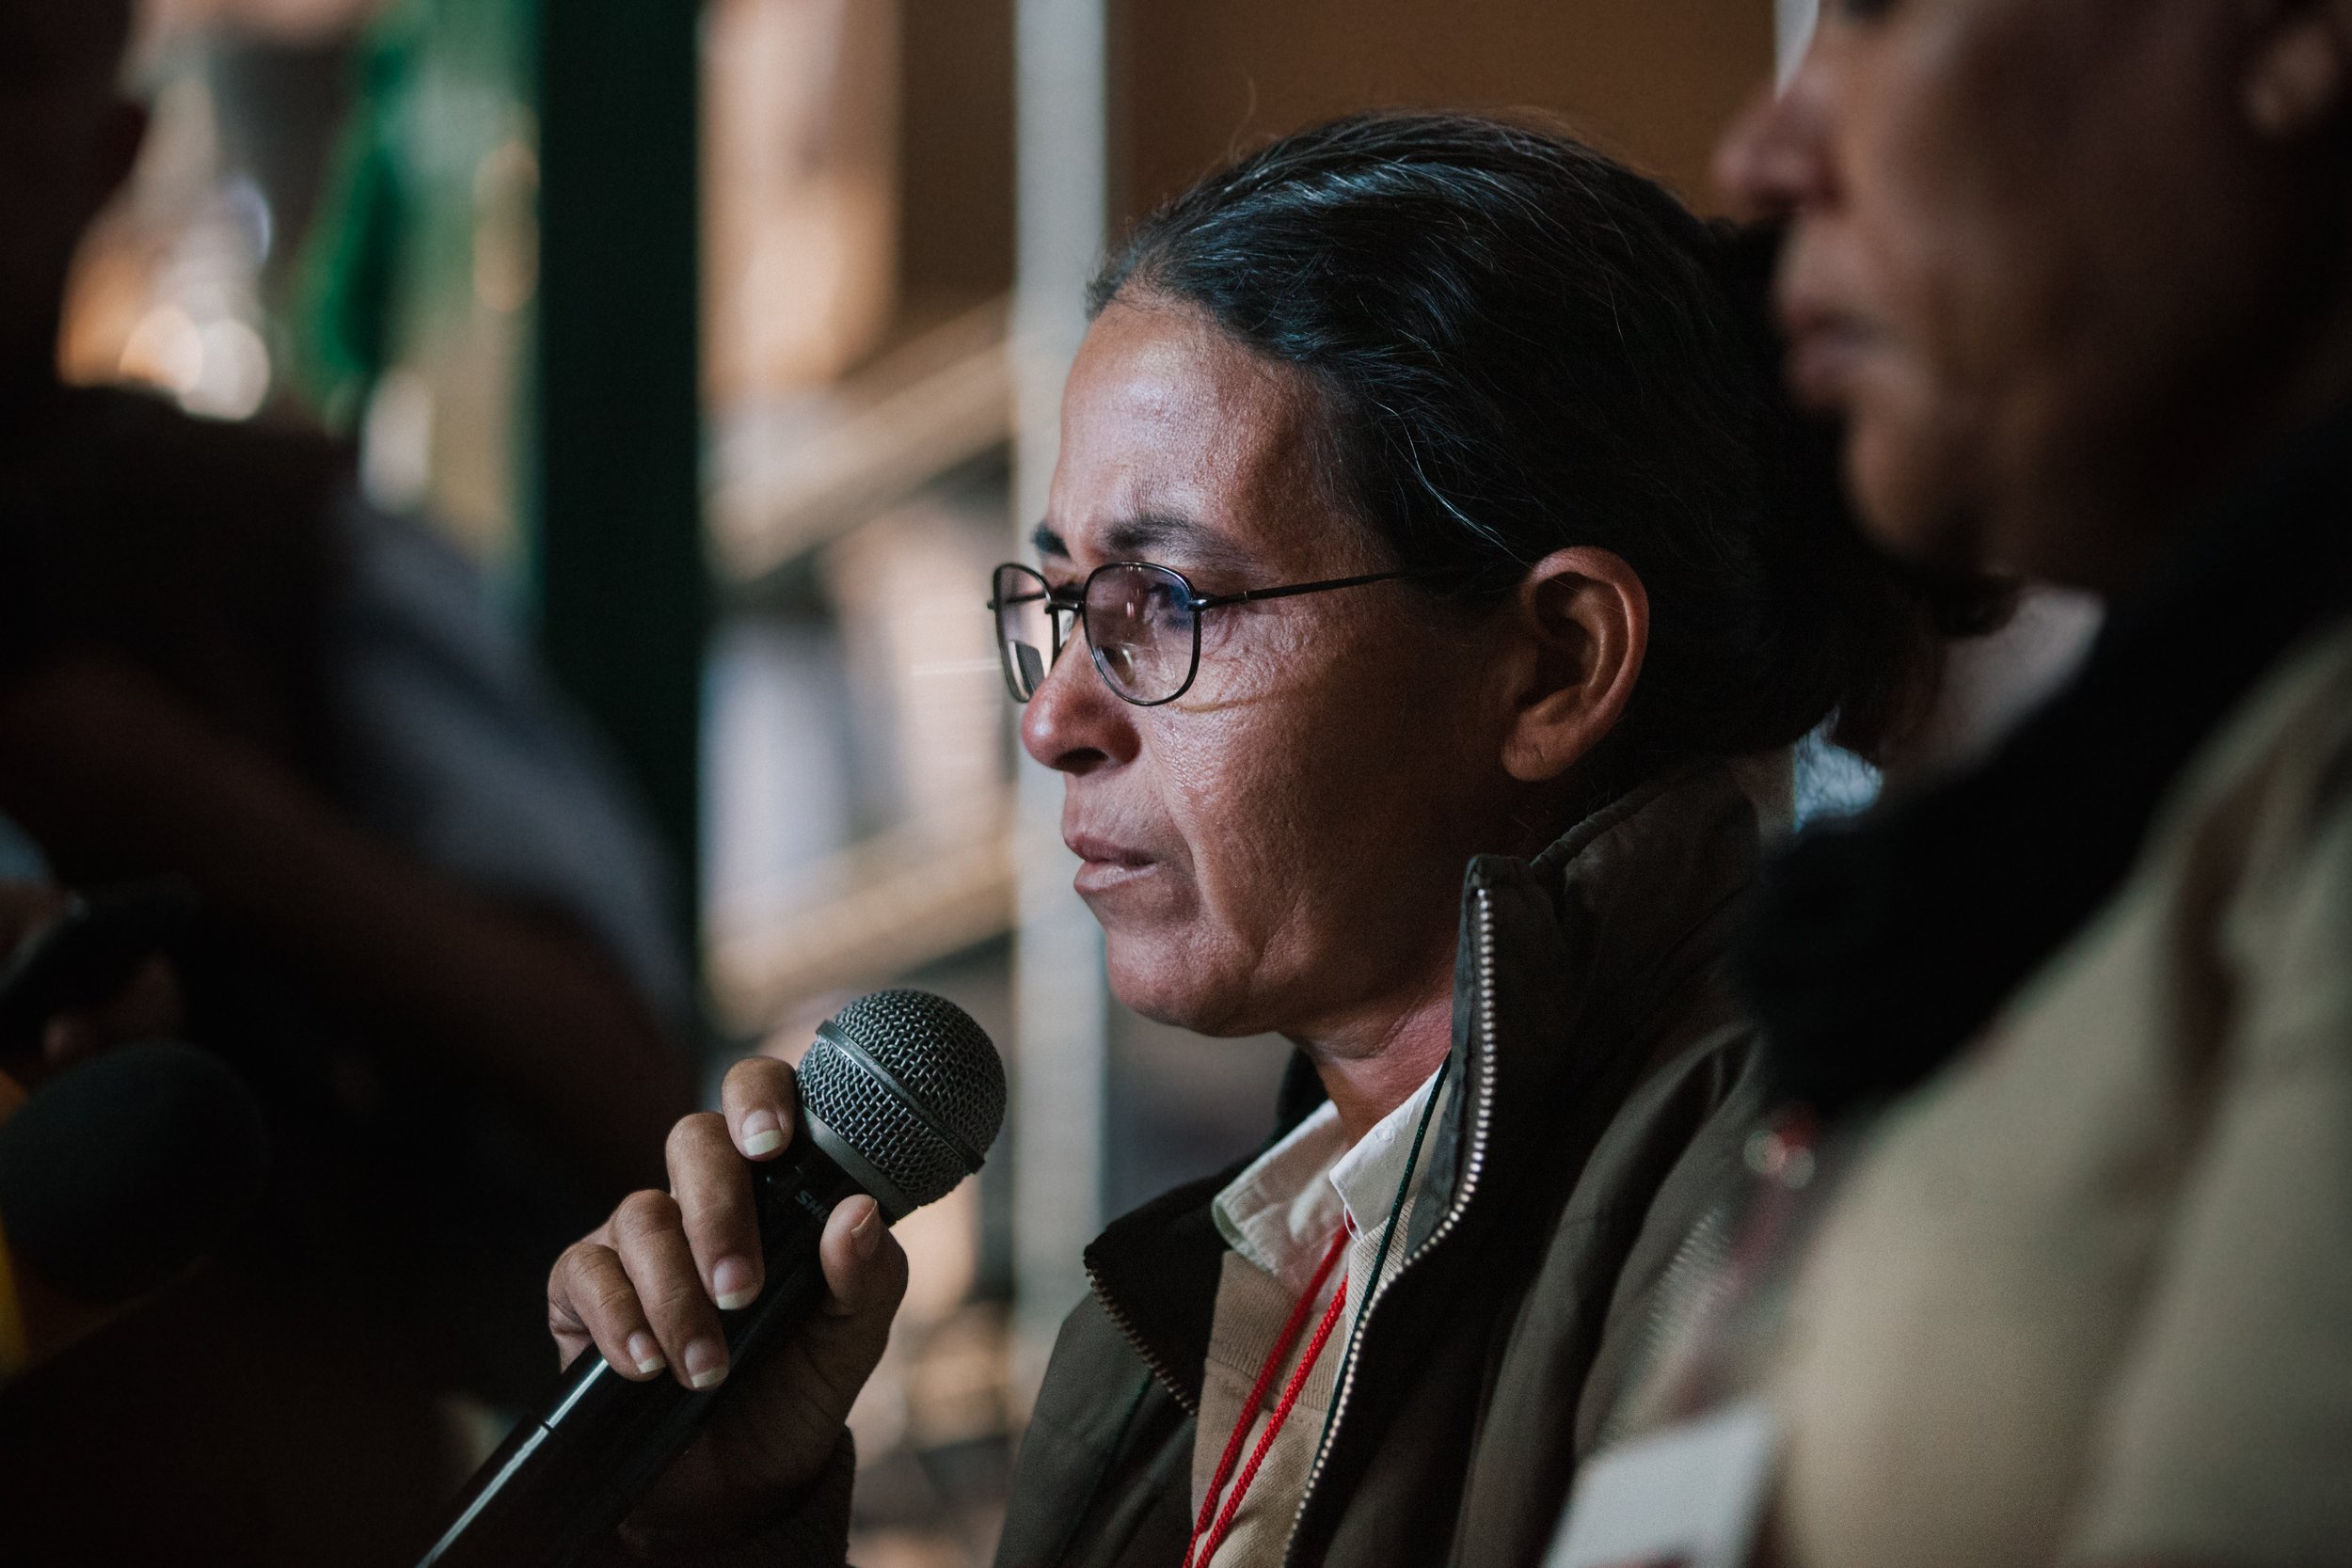  Liliam Morales, a mother searching for her missing daughter, speaks passionately during a press conference in Nogales, Sonora, Mexico. She and the other mothers demand justice from the Mexican government and plead for any information regarding their